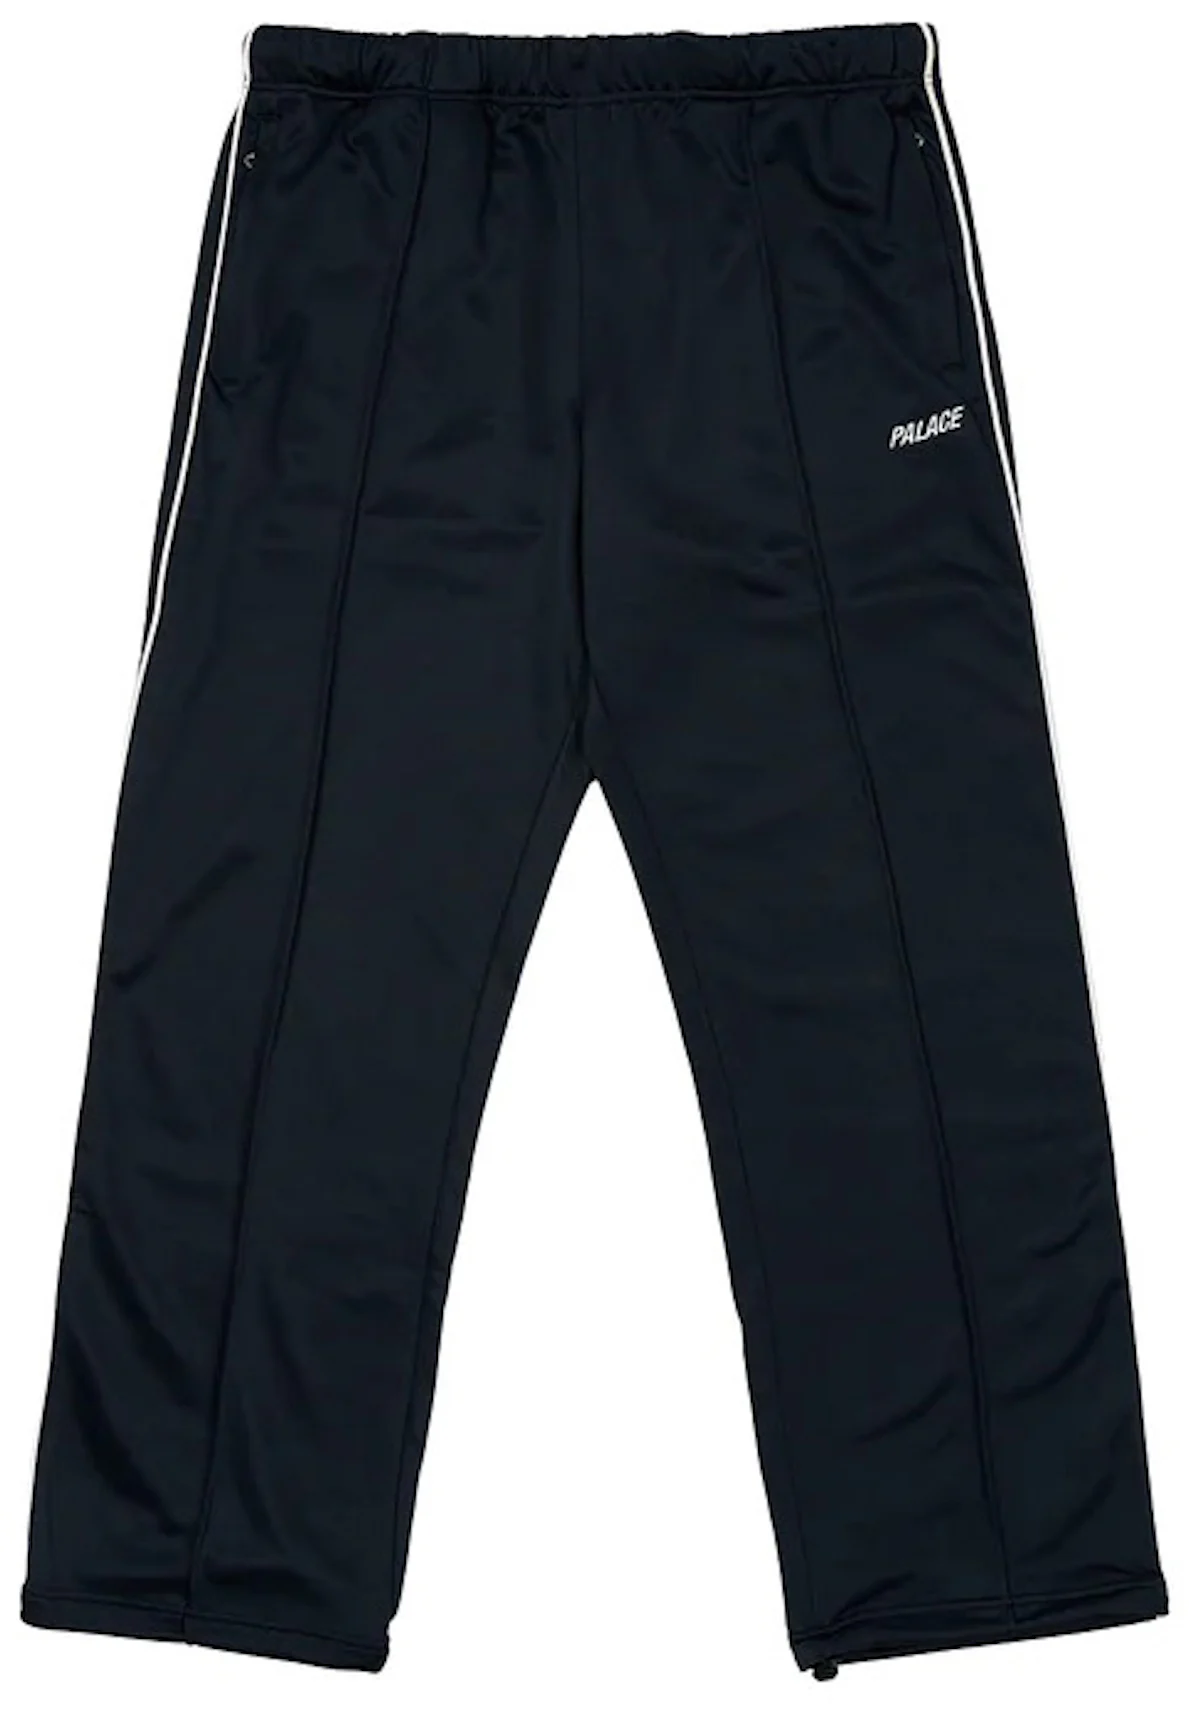 https://images.stockx.com/images/Palace-Ultra-Relax-Trouser-Navy.jpg?fit=fill&bg=FFFFFF&w=1200&h=857&fm=webp&auto=compress&dpr=2&trim=color&updated_at=1683303479&q=60